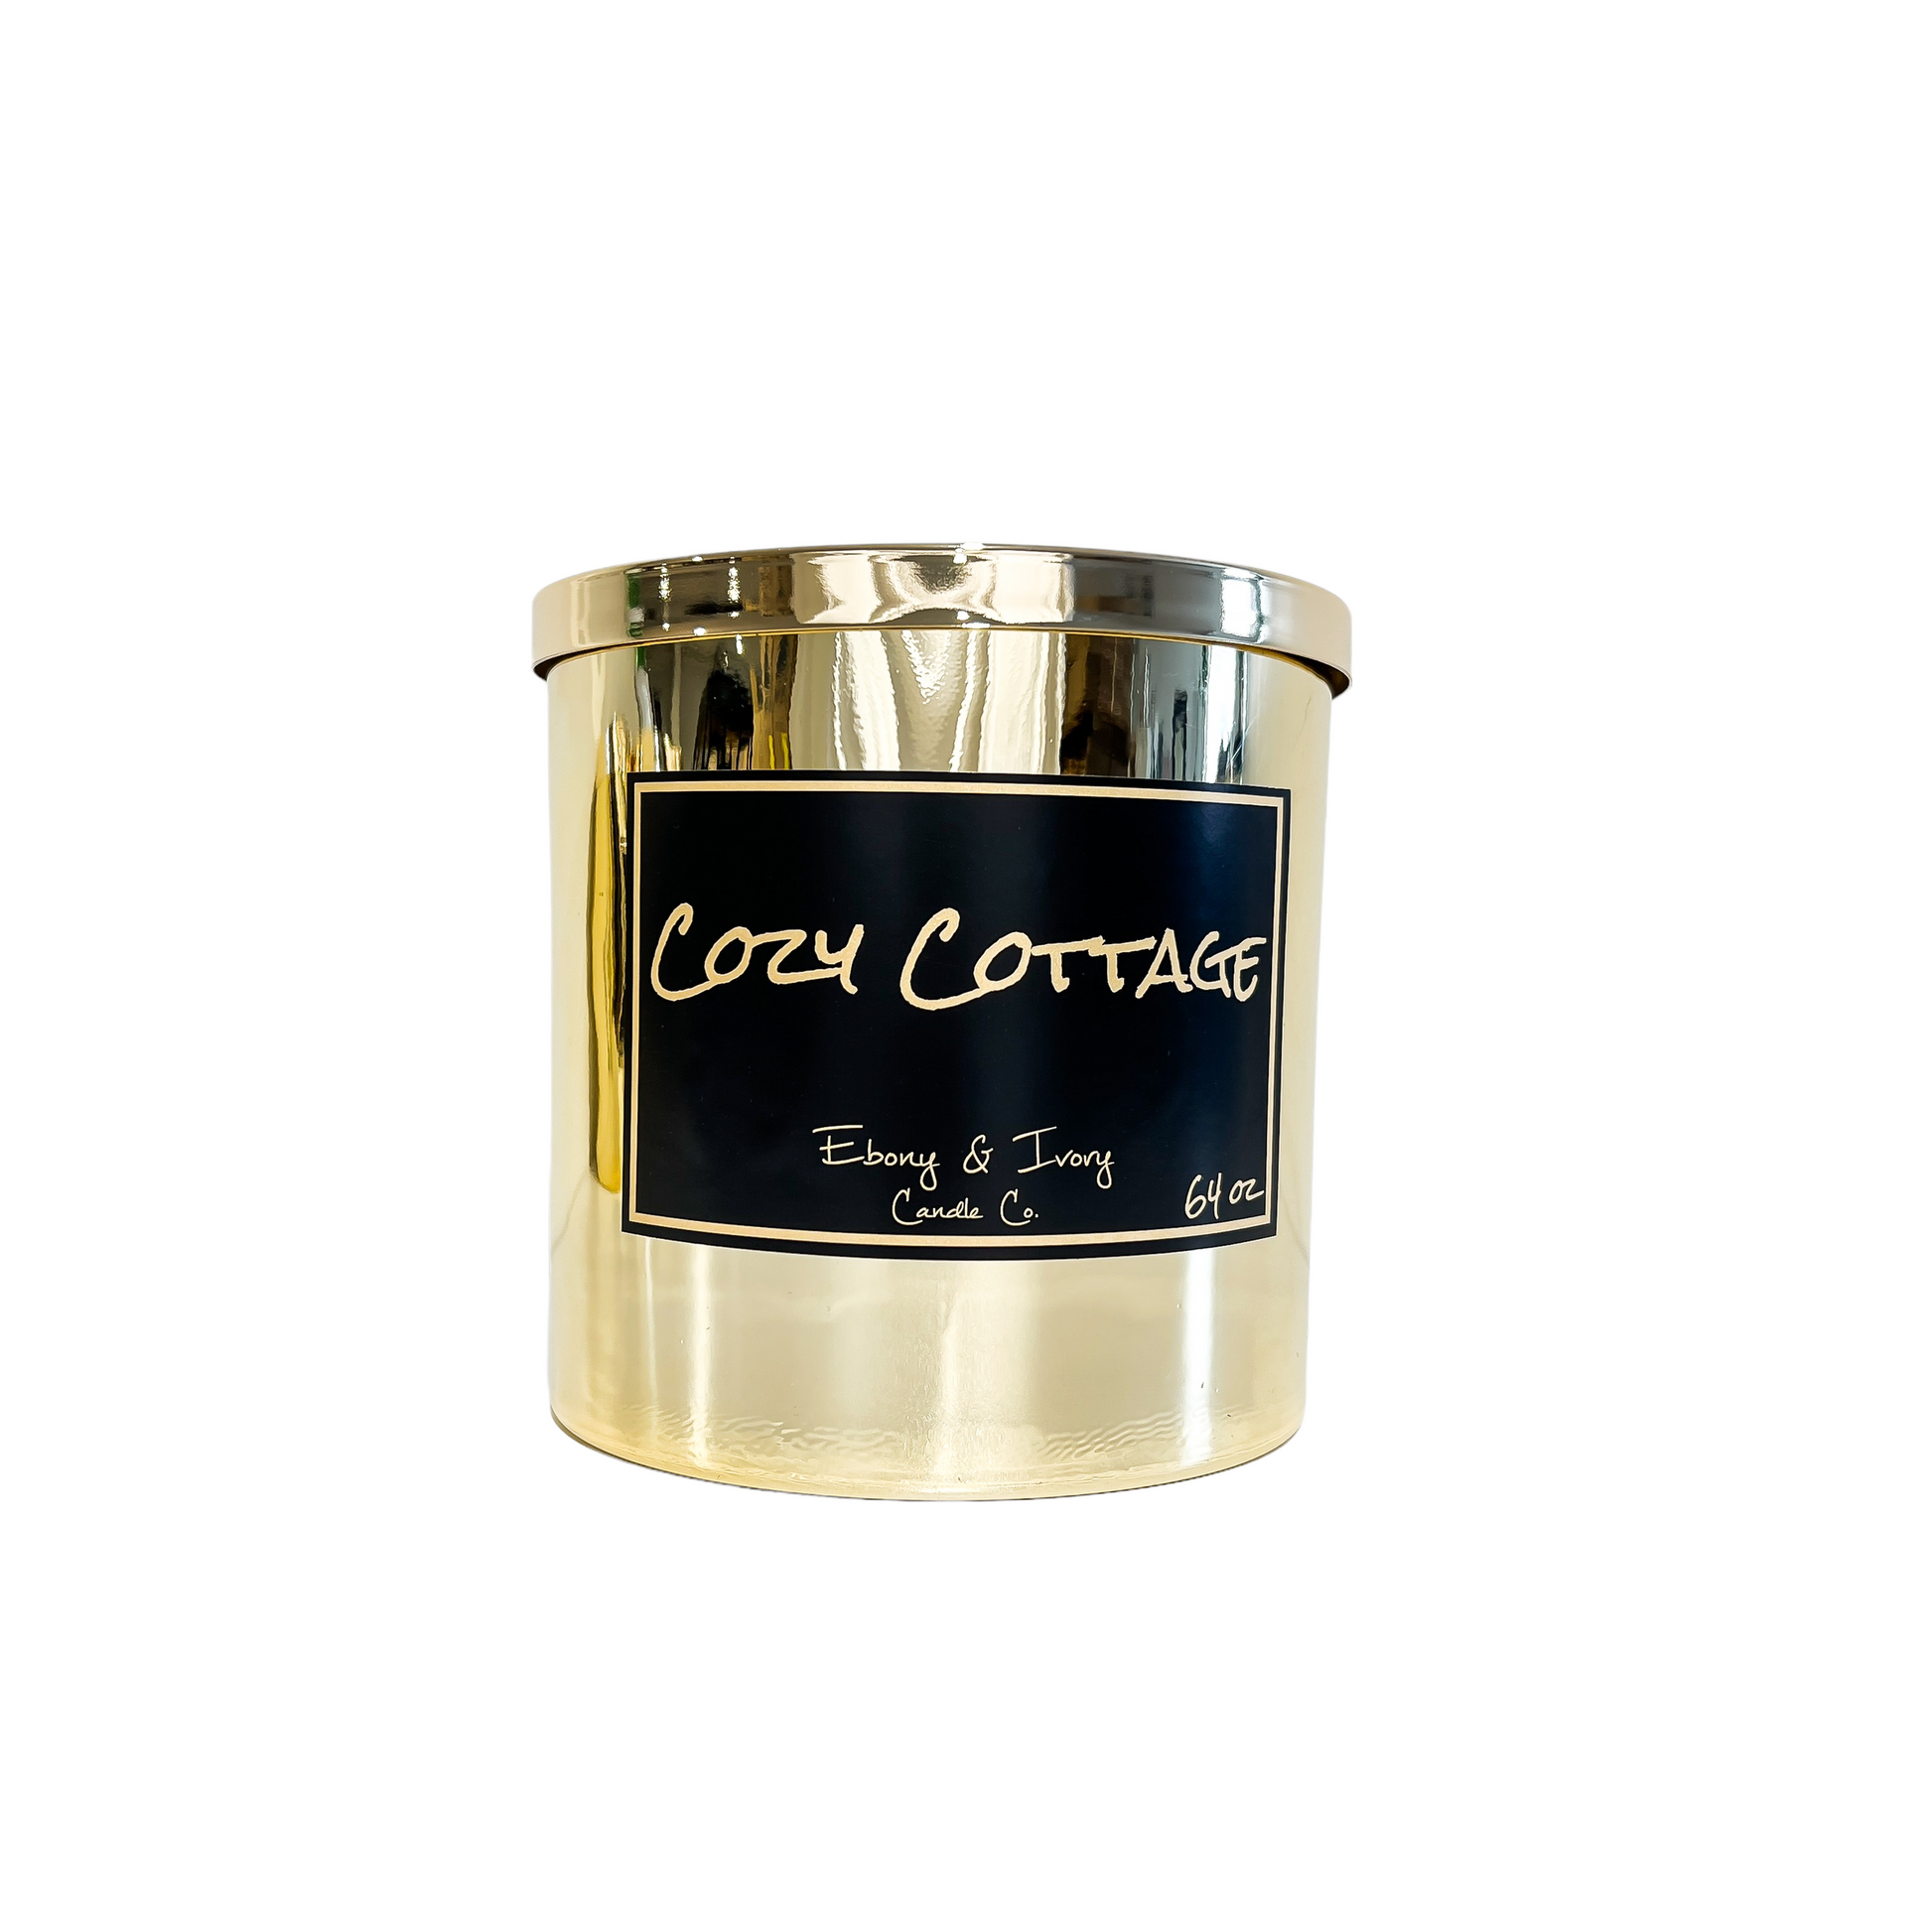 Gold, sixty four ounces, frozen pine, warm spice, and brown sugar scented soy wax candle with a gold lid and a black label that reads Cozy Cottage